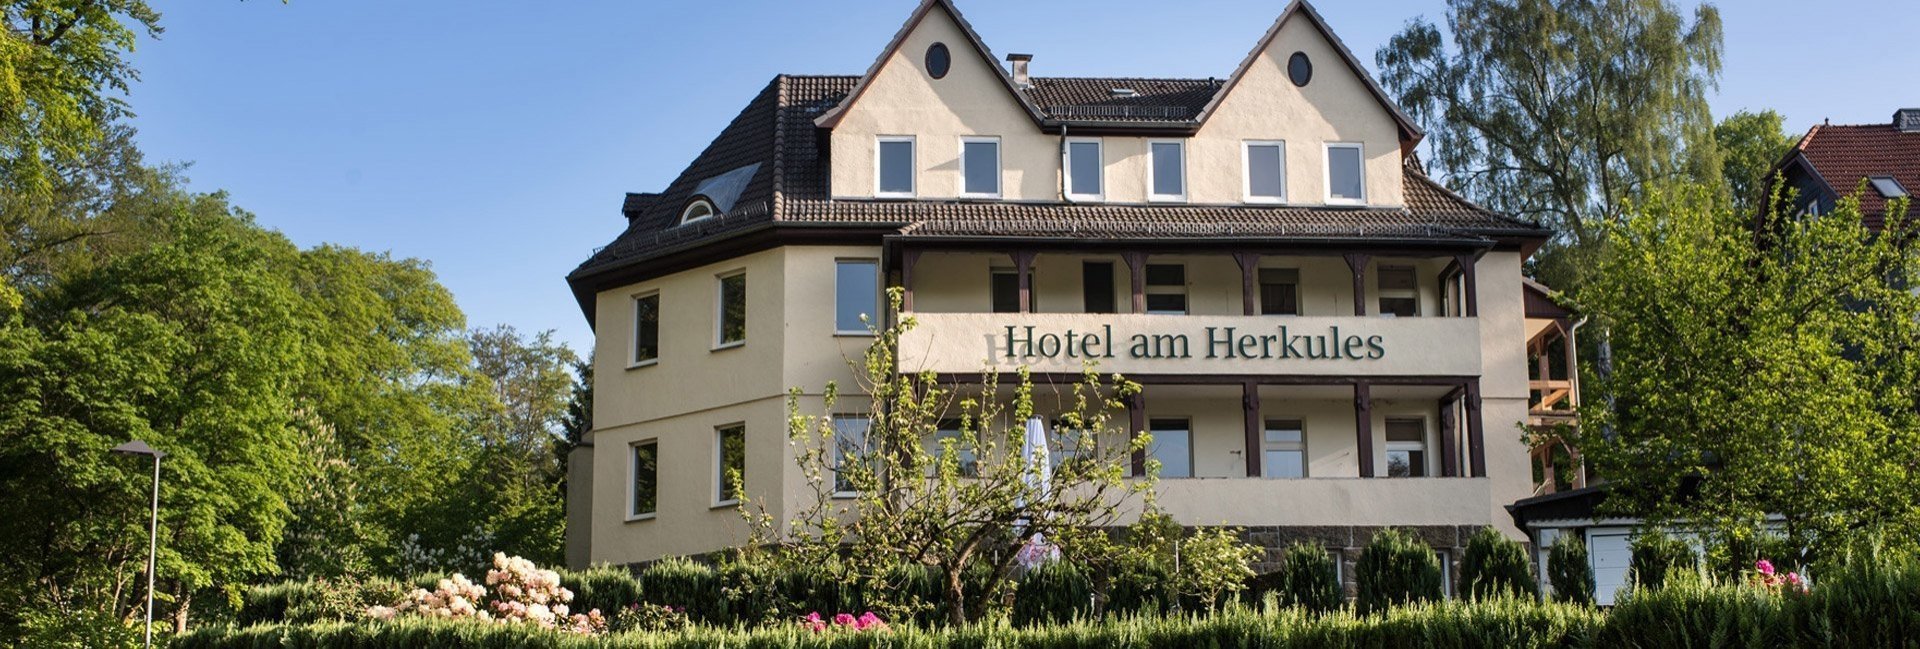 Herkules Tracking and Relaxing – Hotel am Herkules